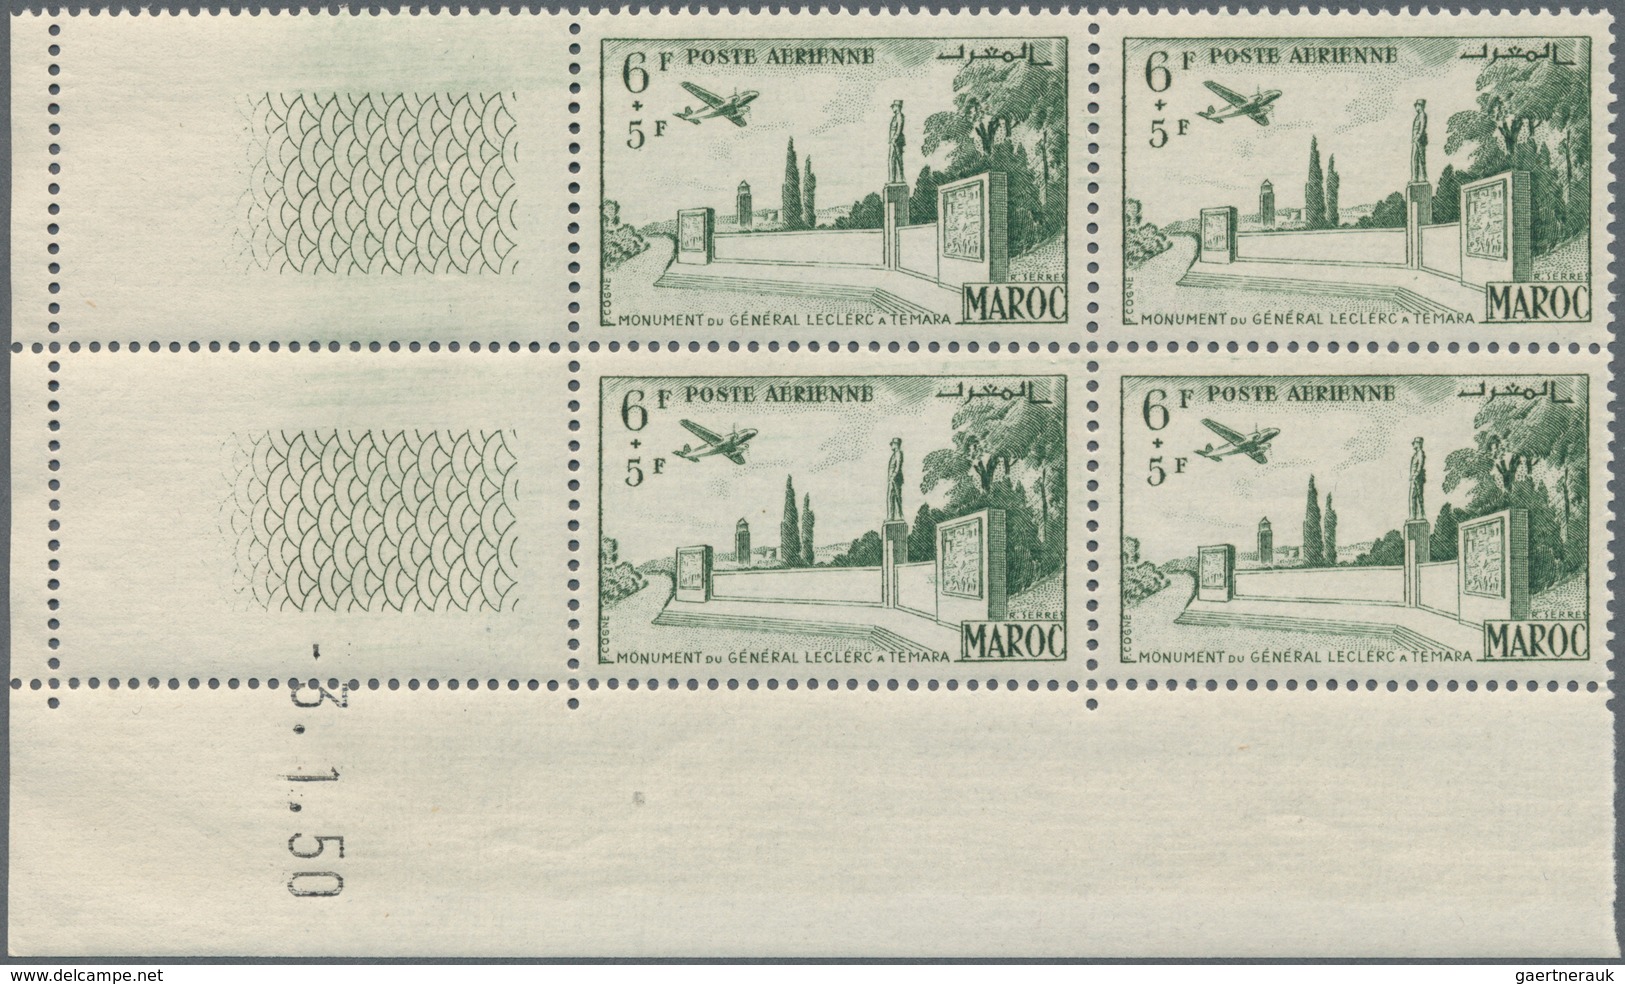 12206 Marokko: 1952, Airmails "Leclerc Monument at Temara", 6fr. to 11fr., complete set of four values eac